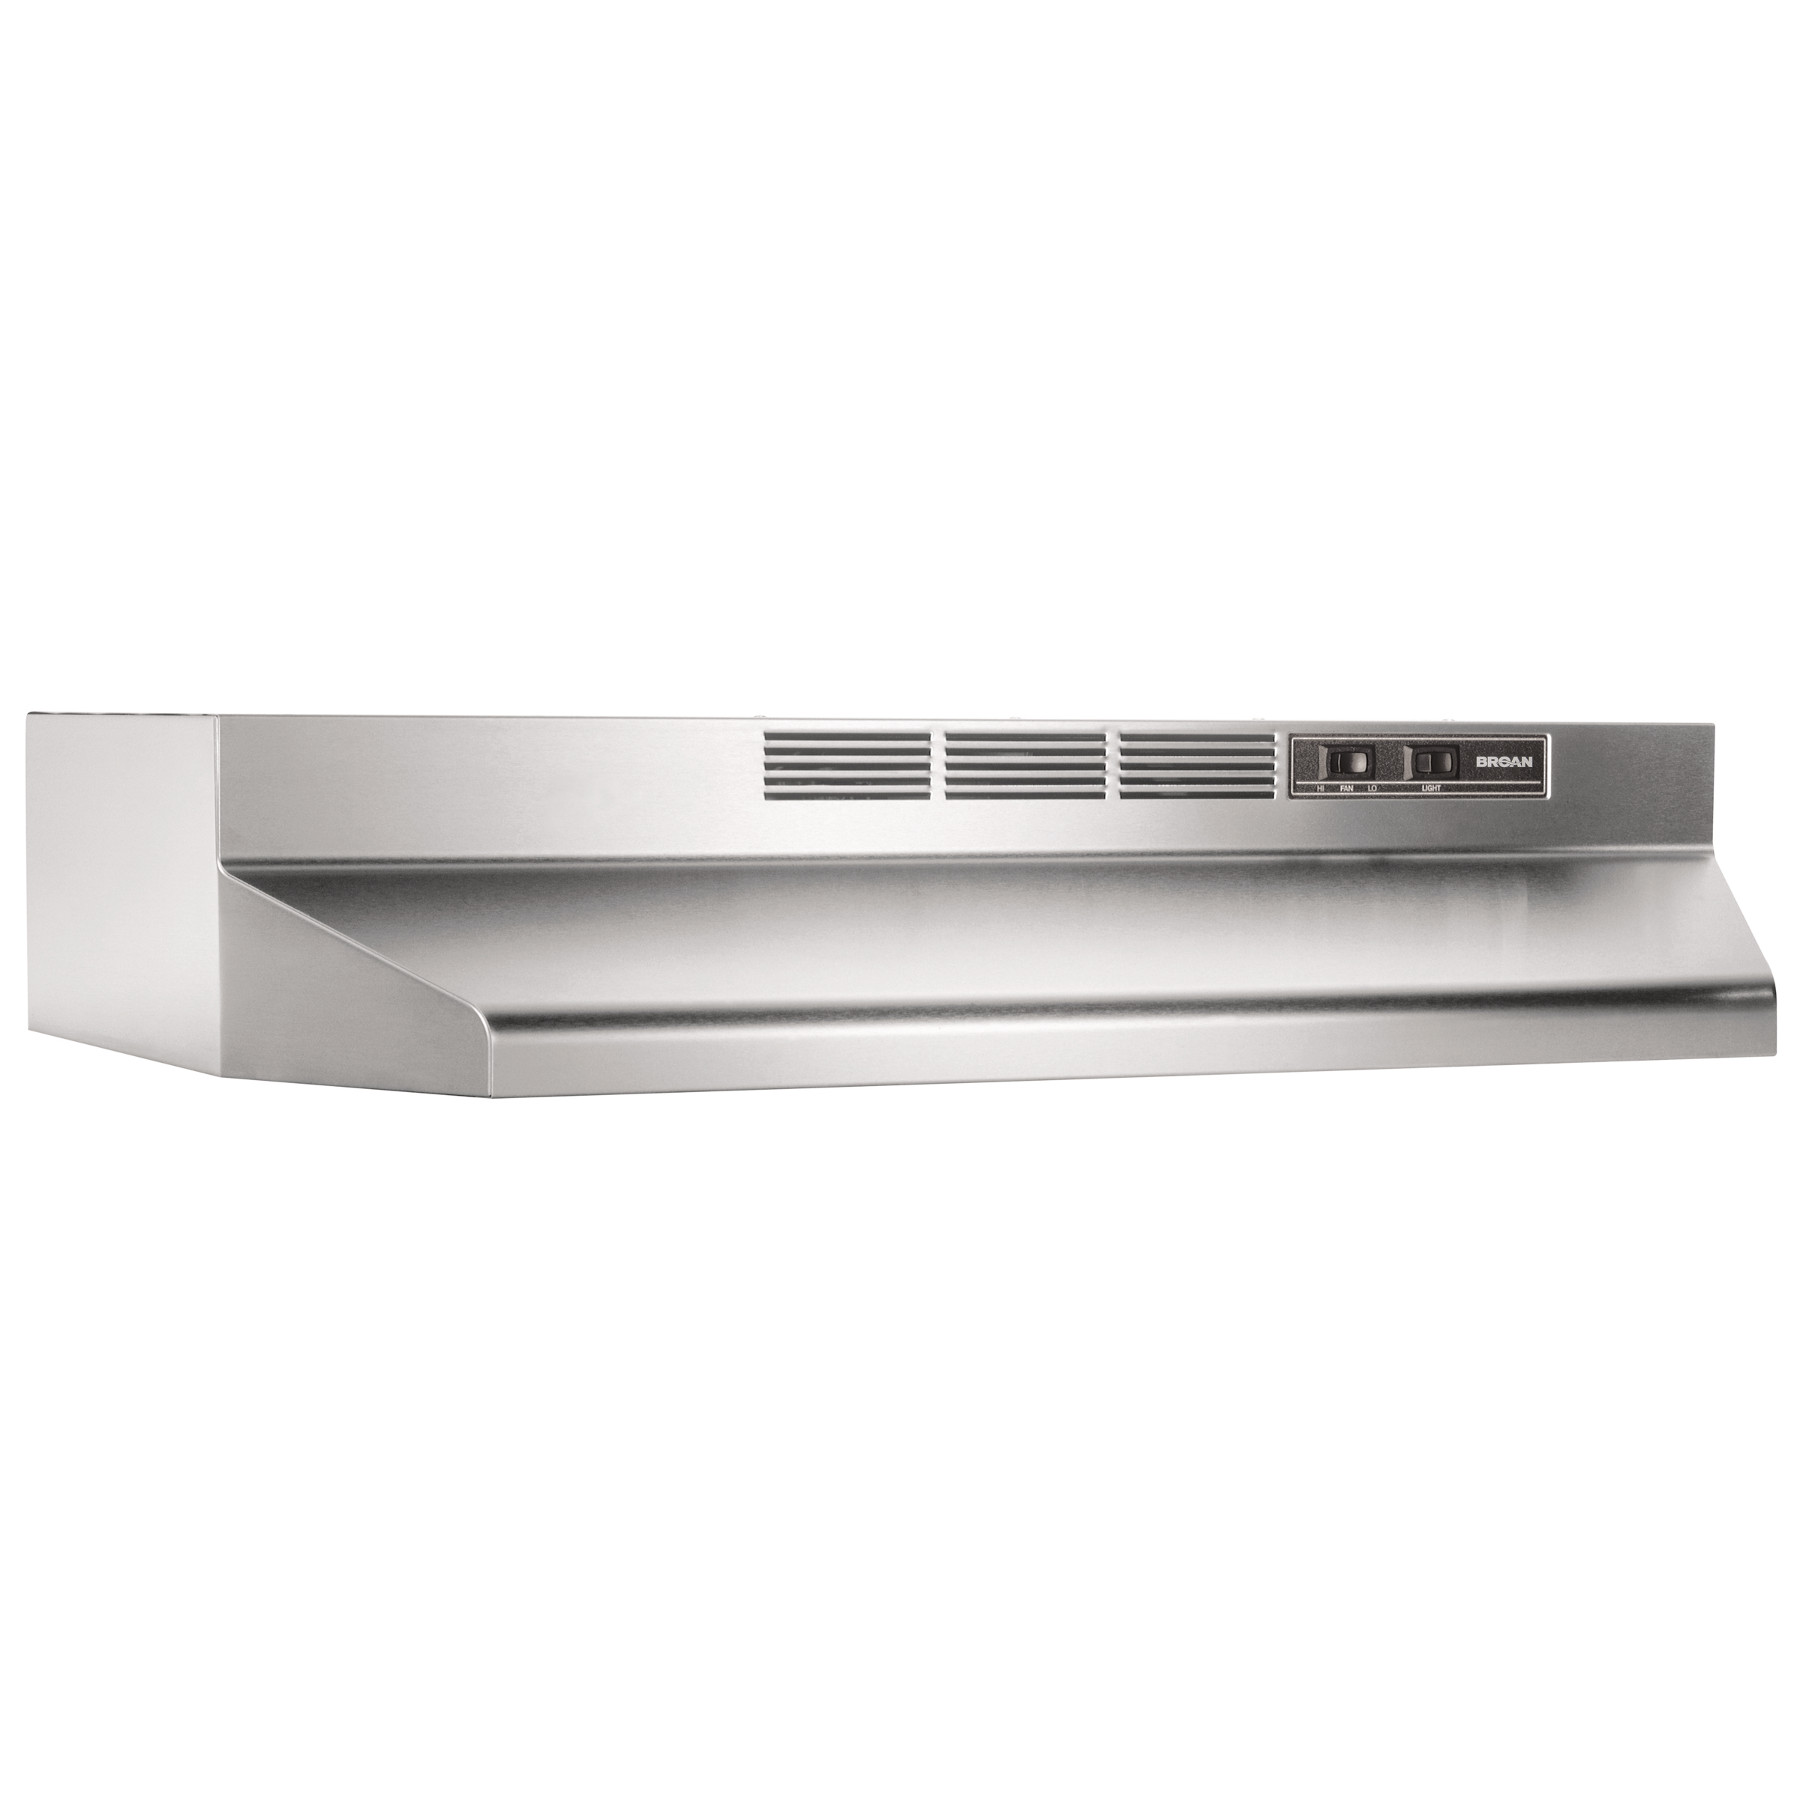 Broan-NuTone 413001 Non-Ducted Under-Cabinet Ductless Range Hood Insert 30 inch 